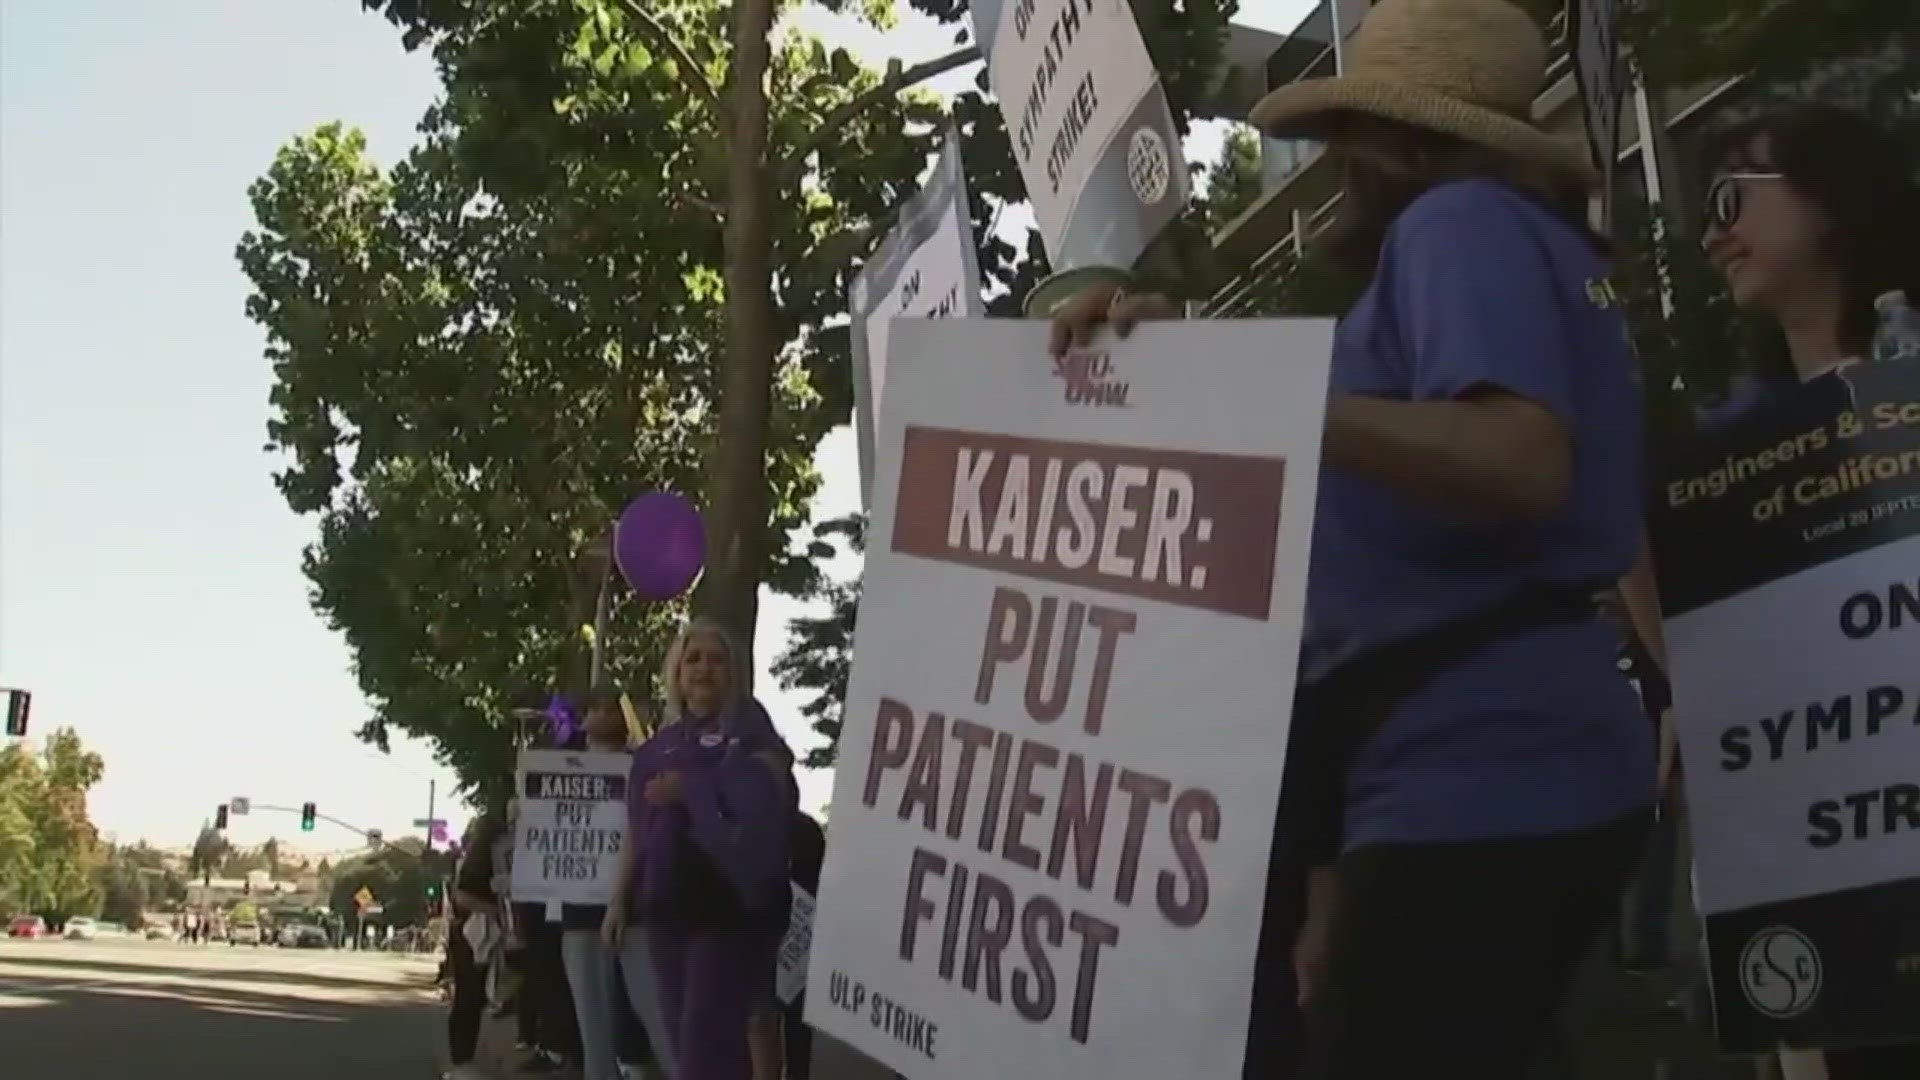 A tentative deal has been reached between Kaiser Permanente and the unions Friday about a week after the largest health care strike in the U.S.